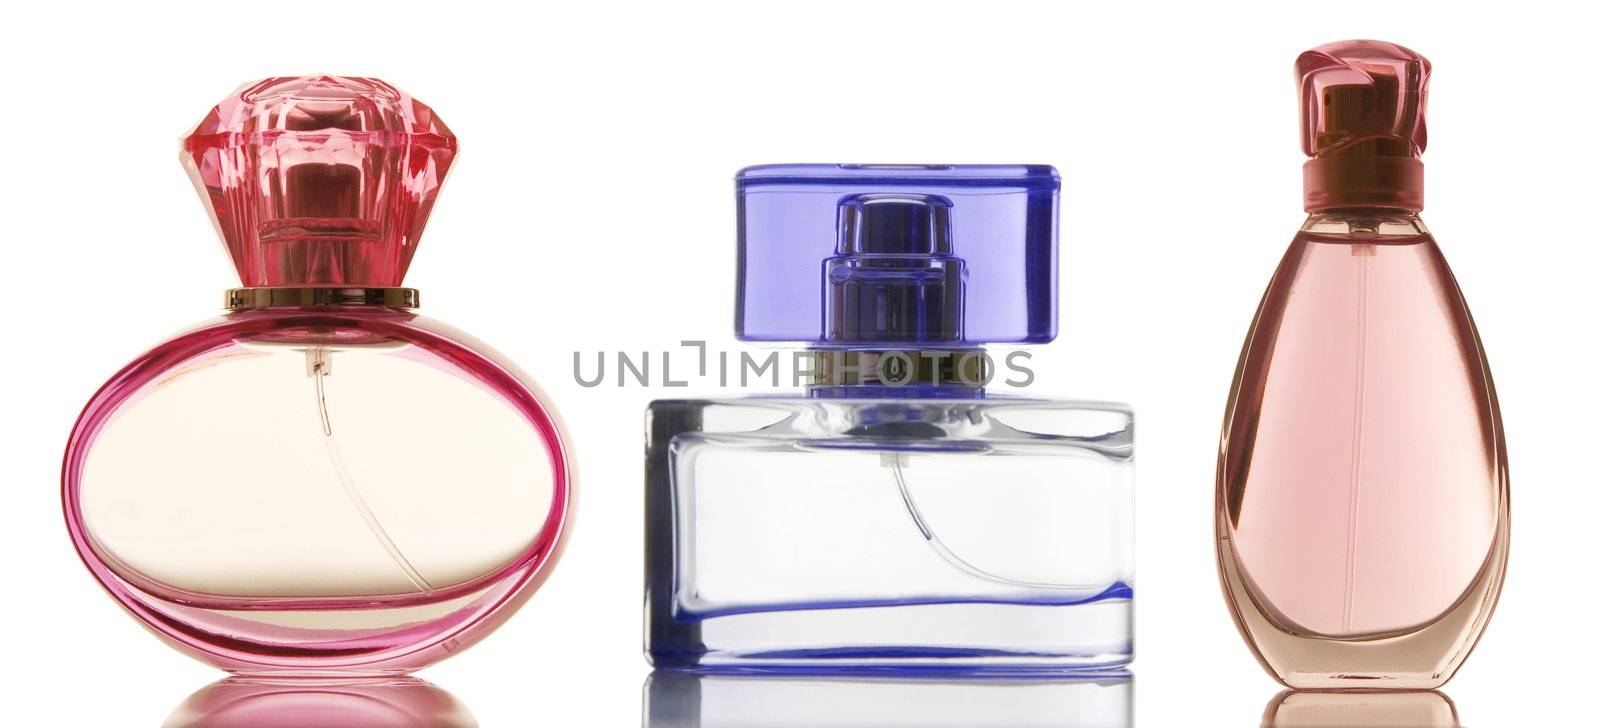 Perfume in a glass bottles by VictorO